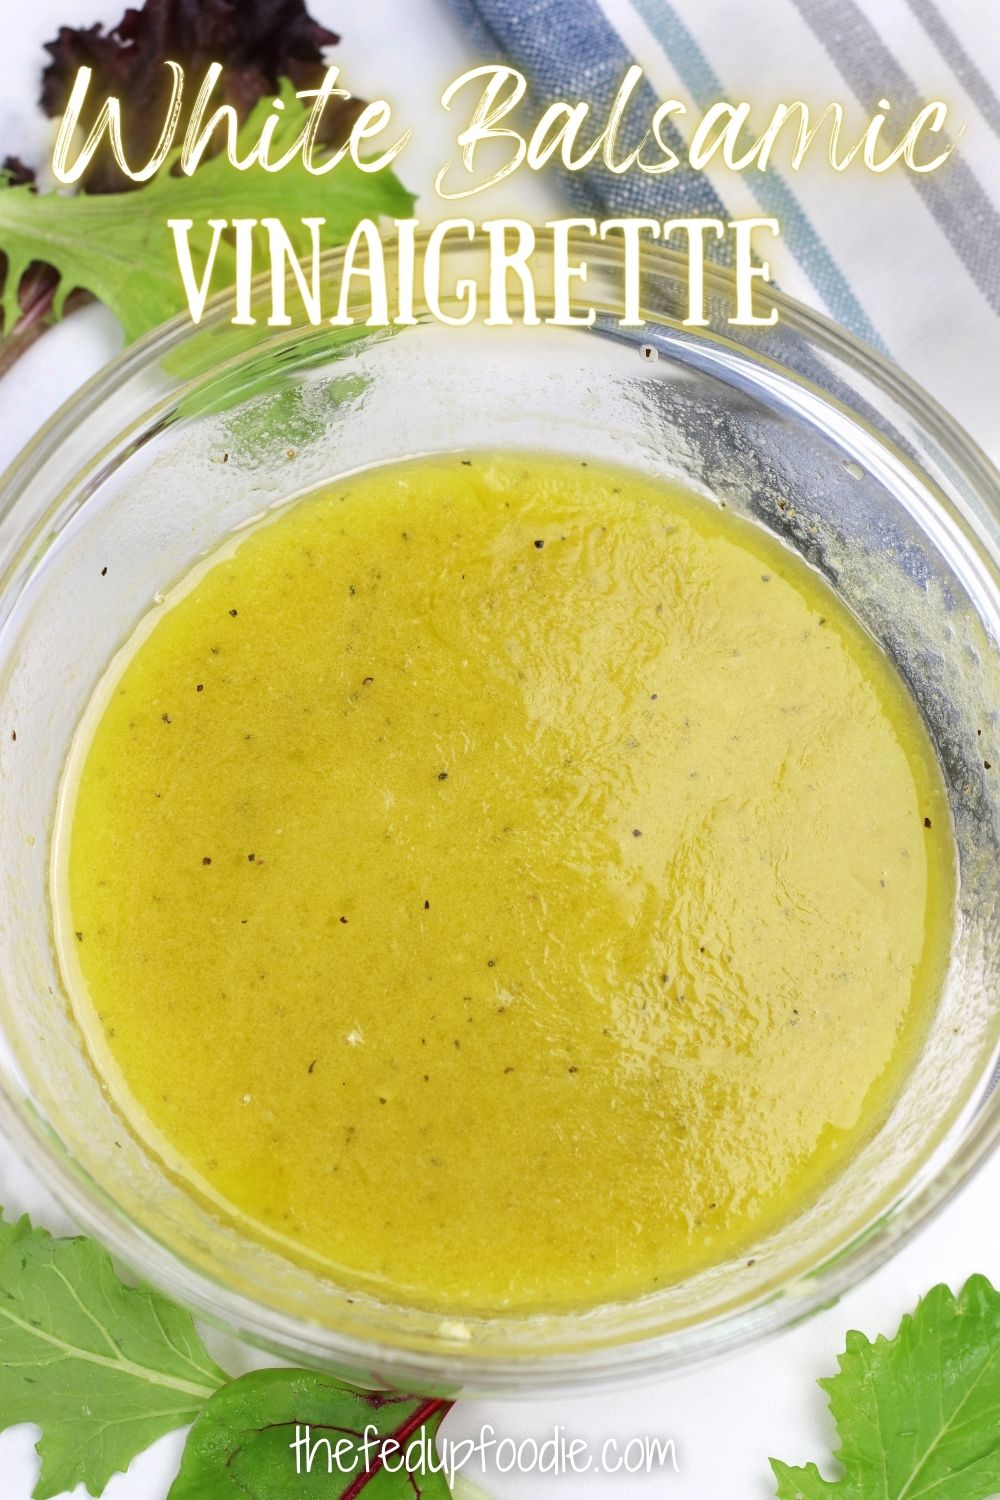 With a delicious balance of sweet to tart, this White Balsamic Vinaigrette is a wonderful companion to all kinds of summer salads and is incredibly easy to make. Made with white balsamic vinegar, extra virgin olive oil, garlic and Dijon Mustard. 
#WhiteBalsamicVinaigrette #WhiteBalsamicVinaigretteDressing #WhiteBalsamicDressing #WhiteBalsamicVinegarette #WhiteBalsamicDressingRecipe #WhiteBalsamicVinaigretteRecipe #WhiteBalsamicSaladDressing